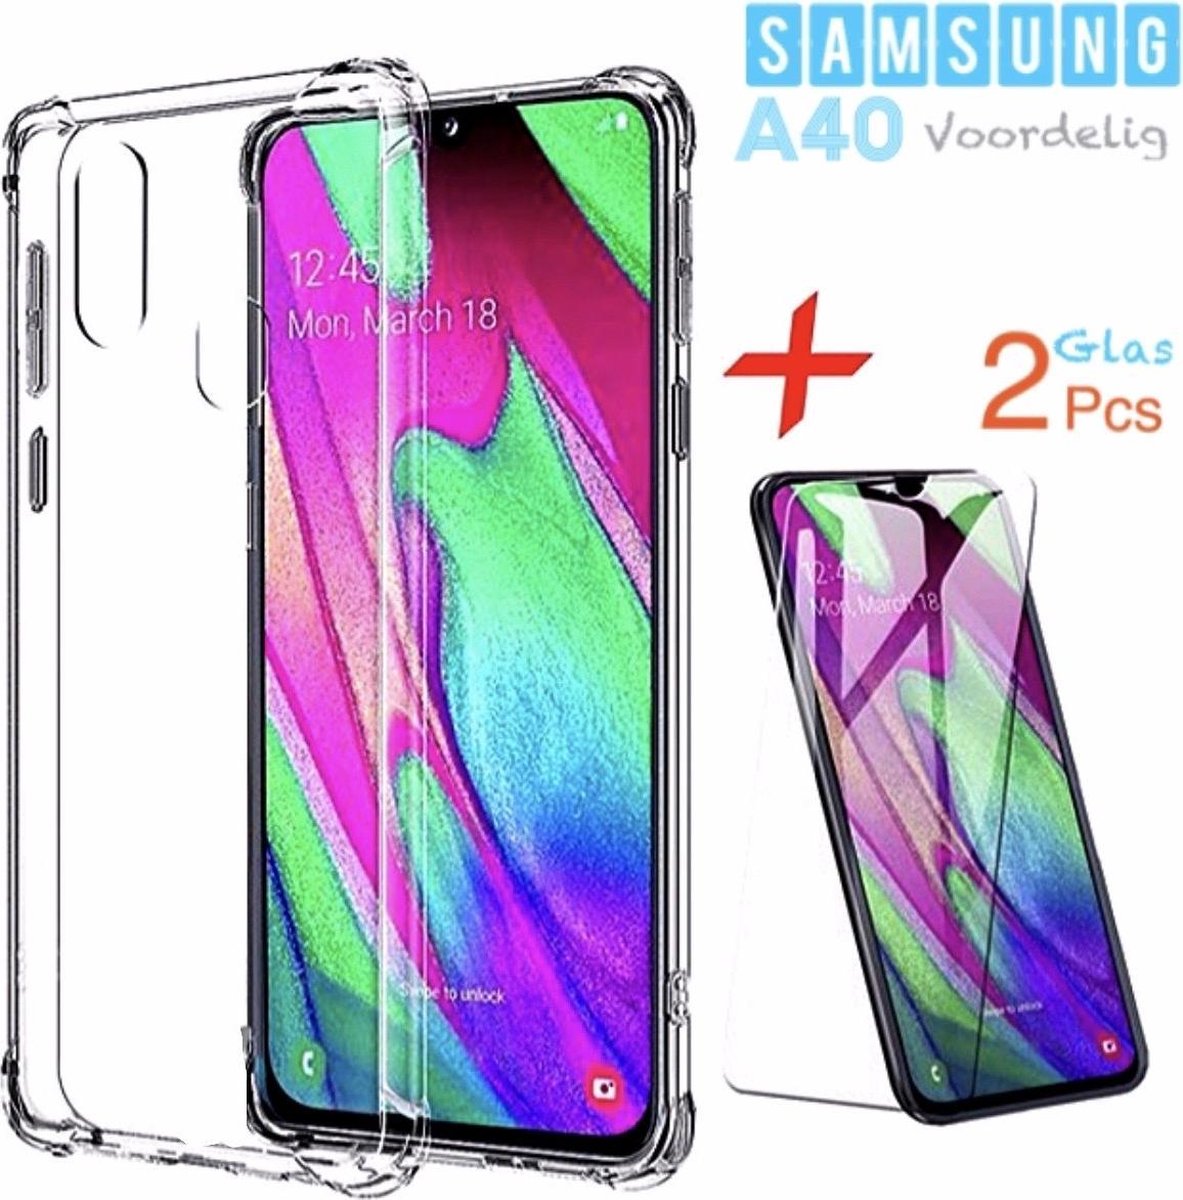 SAMSUNG A40 Power shock Hoesje Transparant (Siliconen TPU Soft Case) + 2Pcs Screenprotector Tempered Glass - Eff Pro